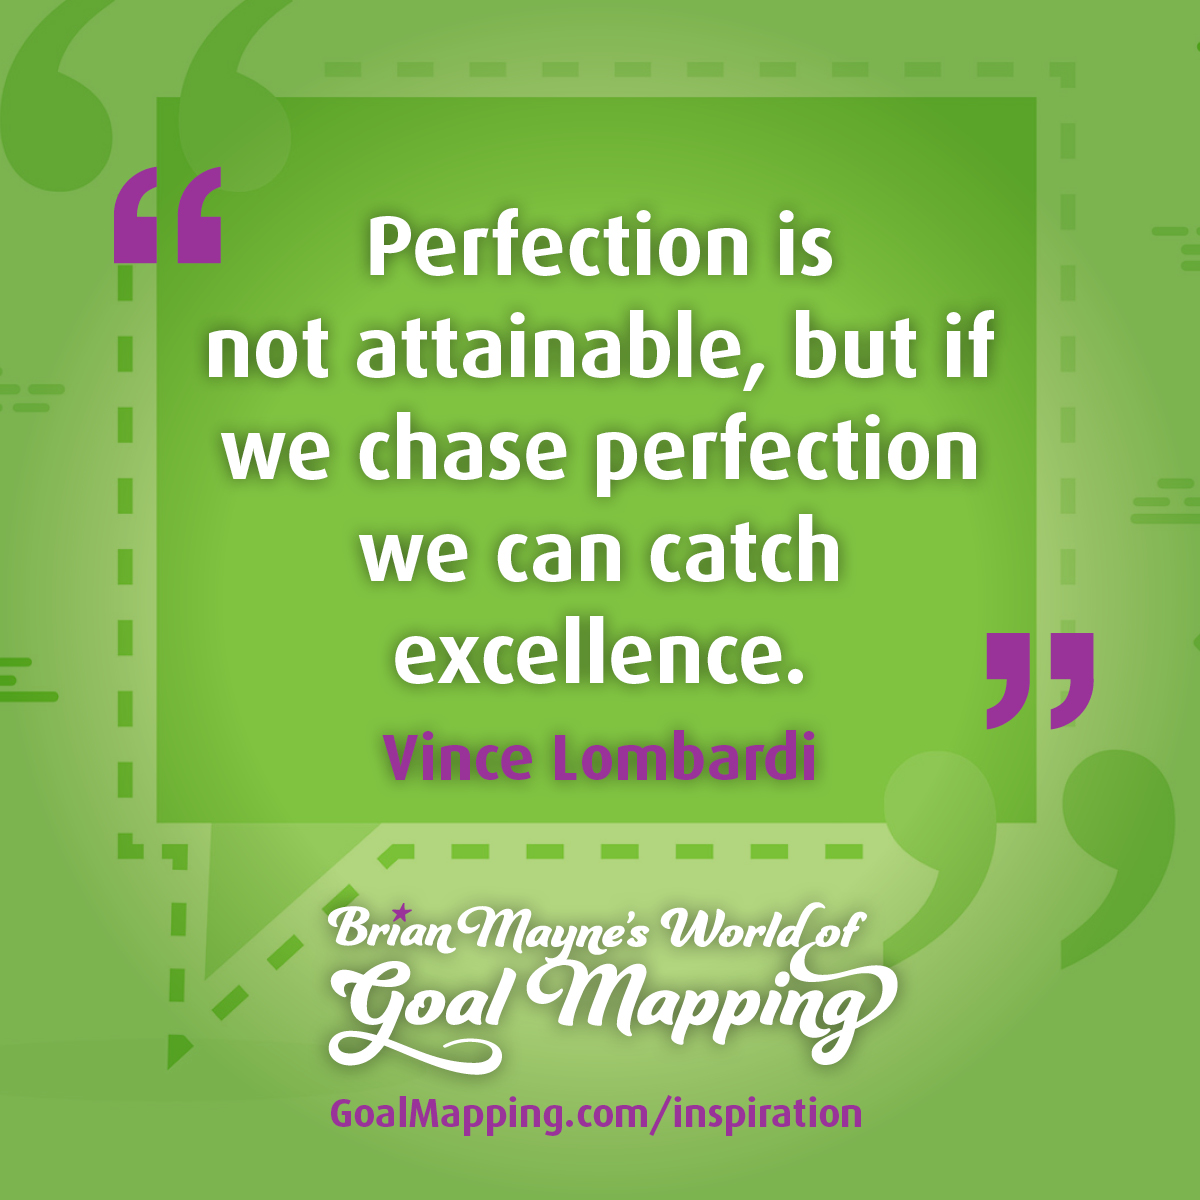 "Perfection is not attainable, but if we chase perfection we can catch excellence." Vince Lombardi